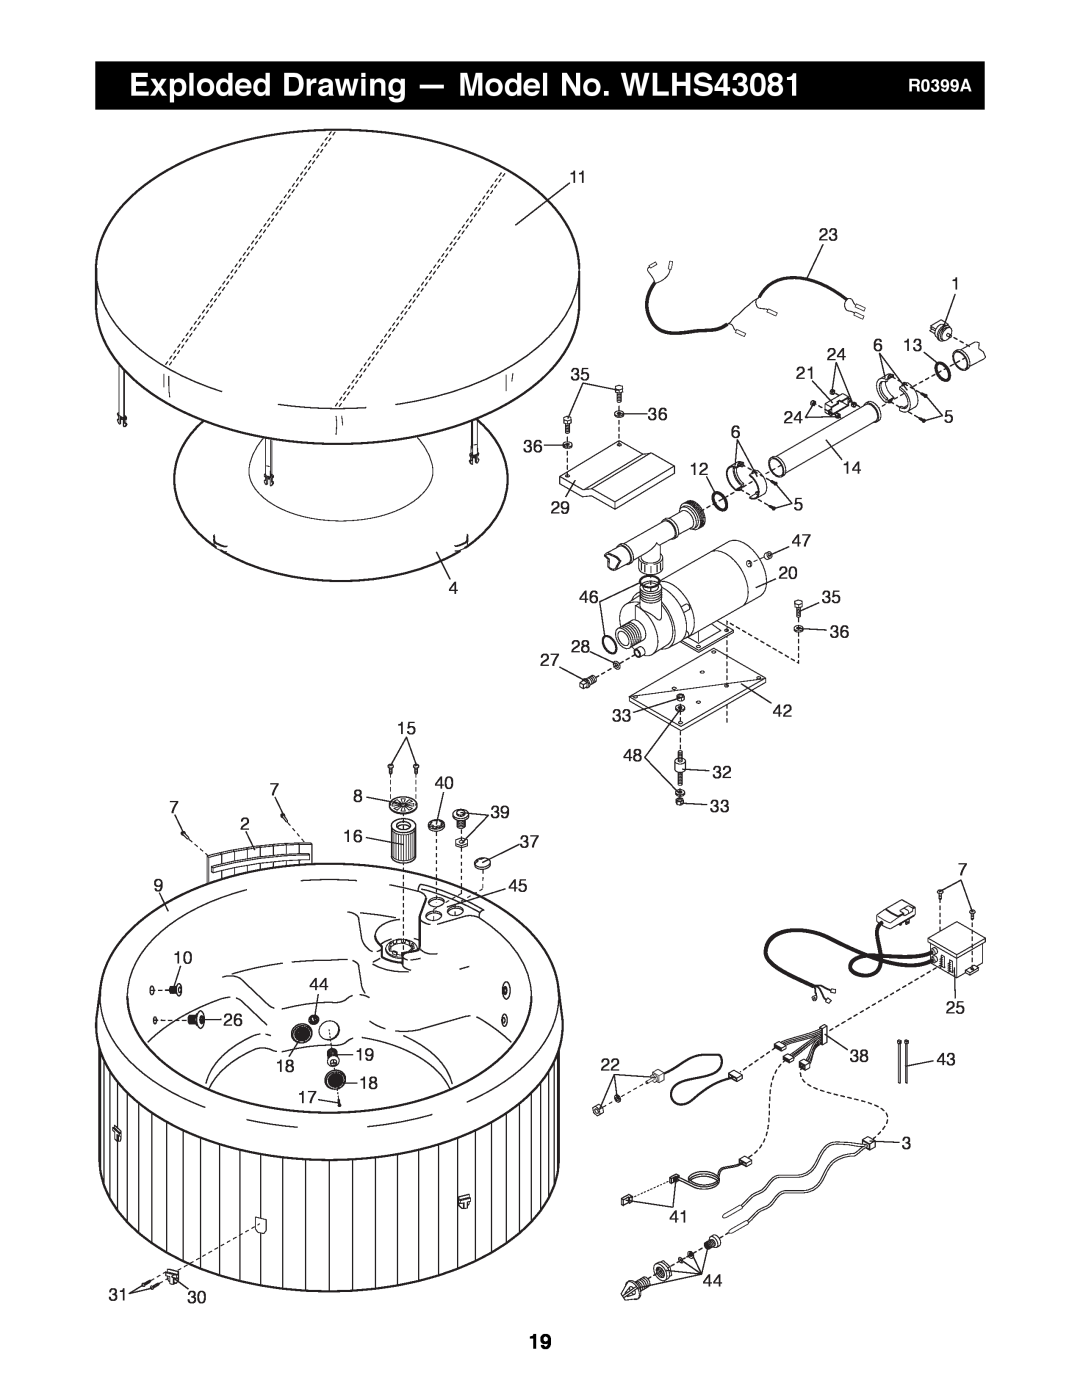 Weslo manual Exploded Drawing Ñ Model No. WLHS43081, R0399A 